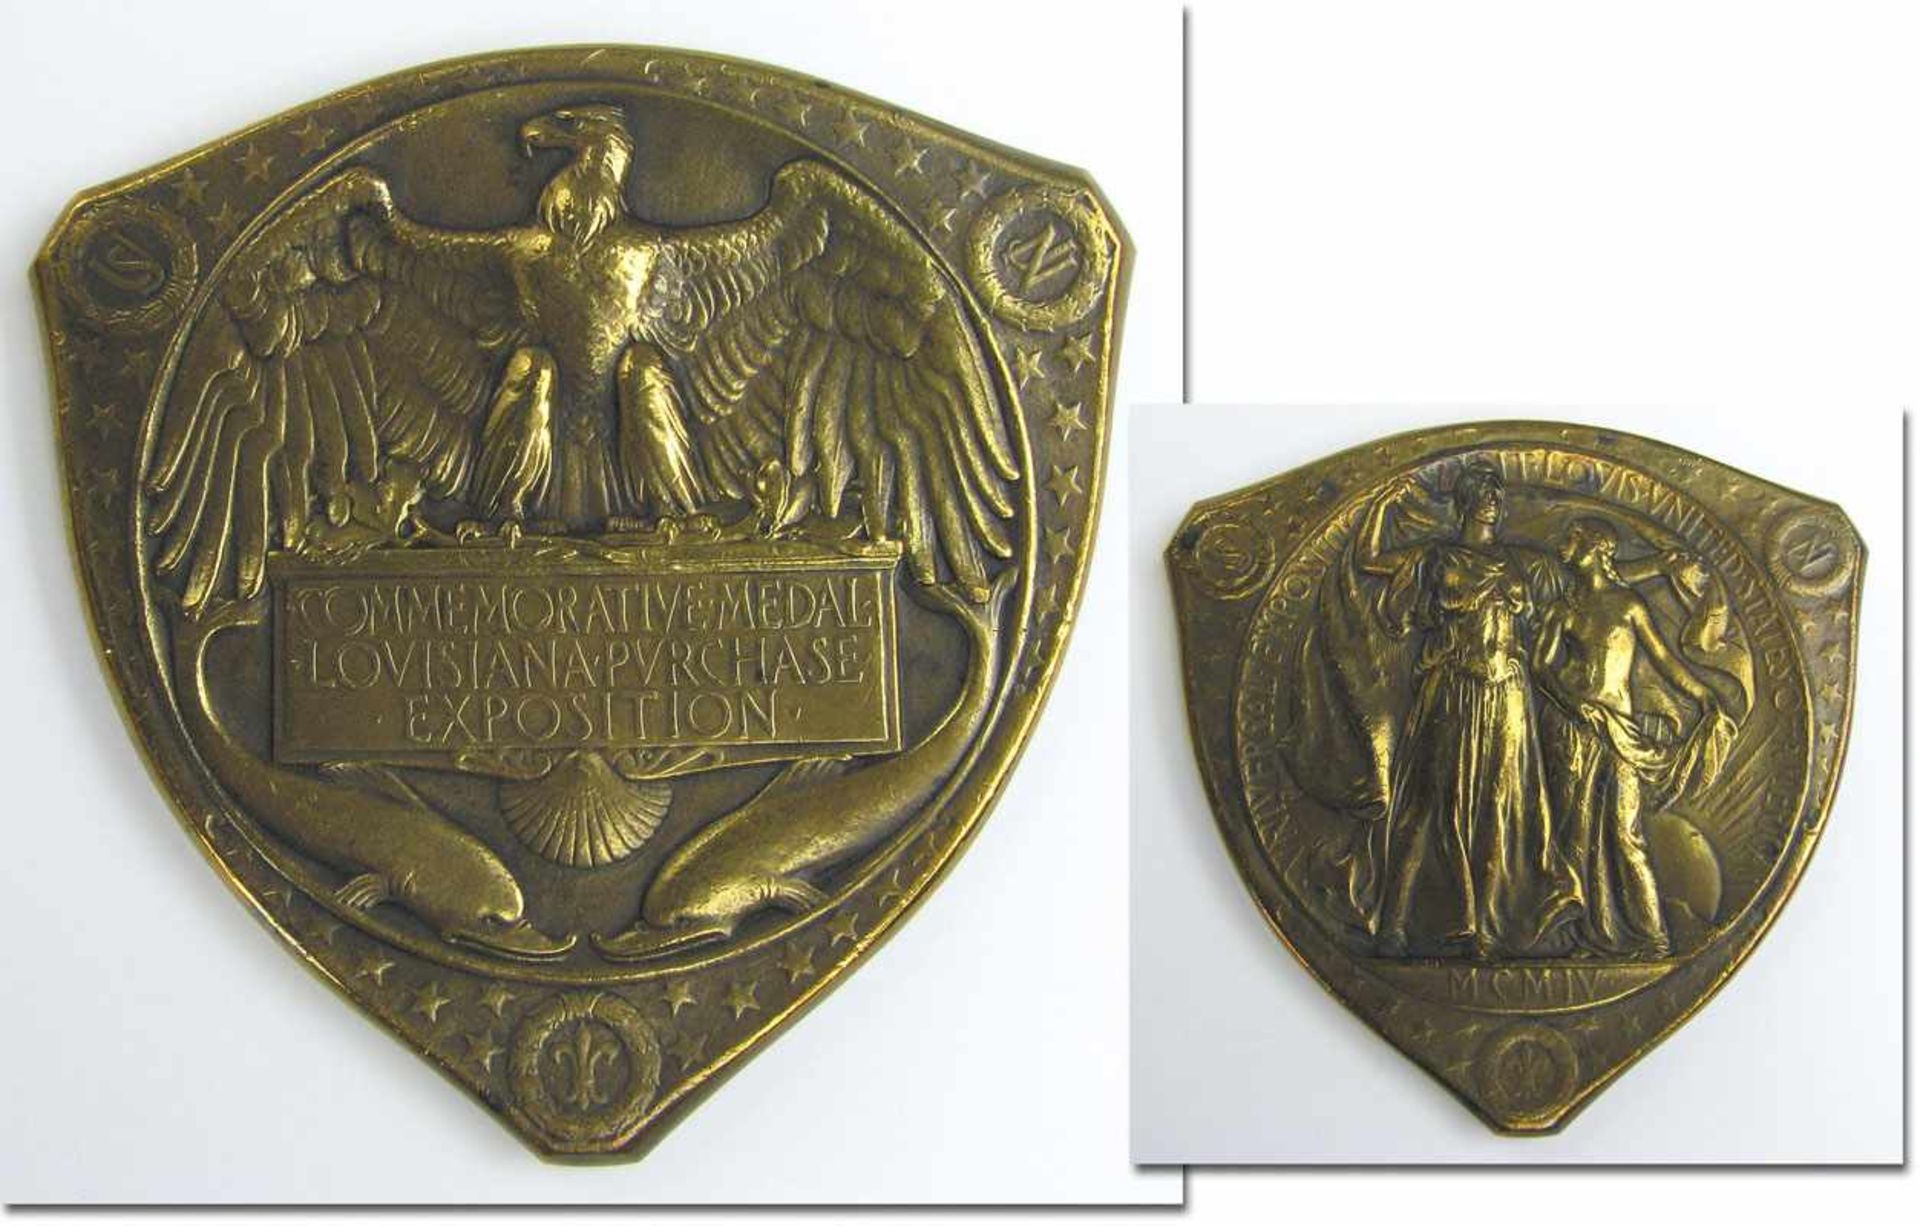 Medal of Honour: Olympic Games 1904. - Medal of Honour from the World Exhibition in St. Louis